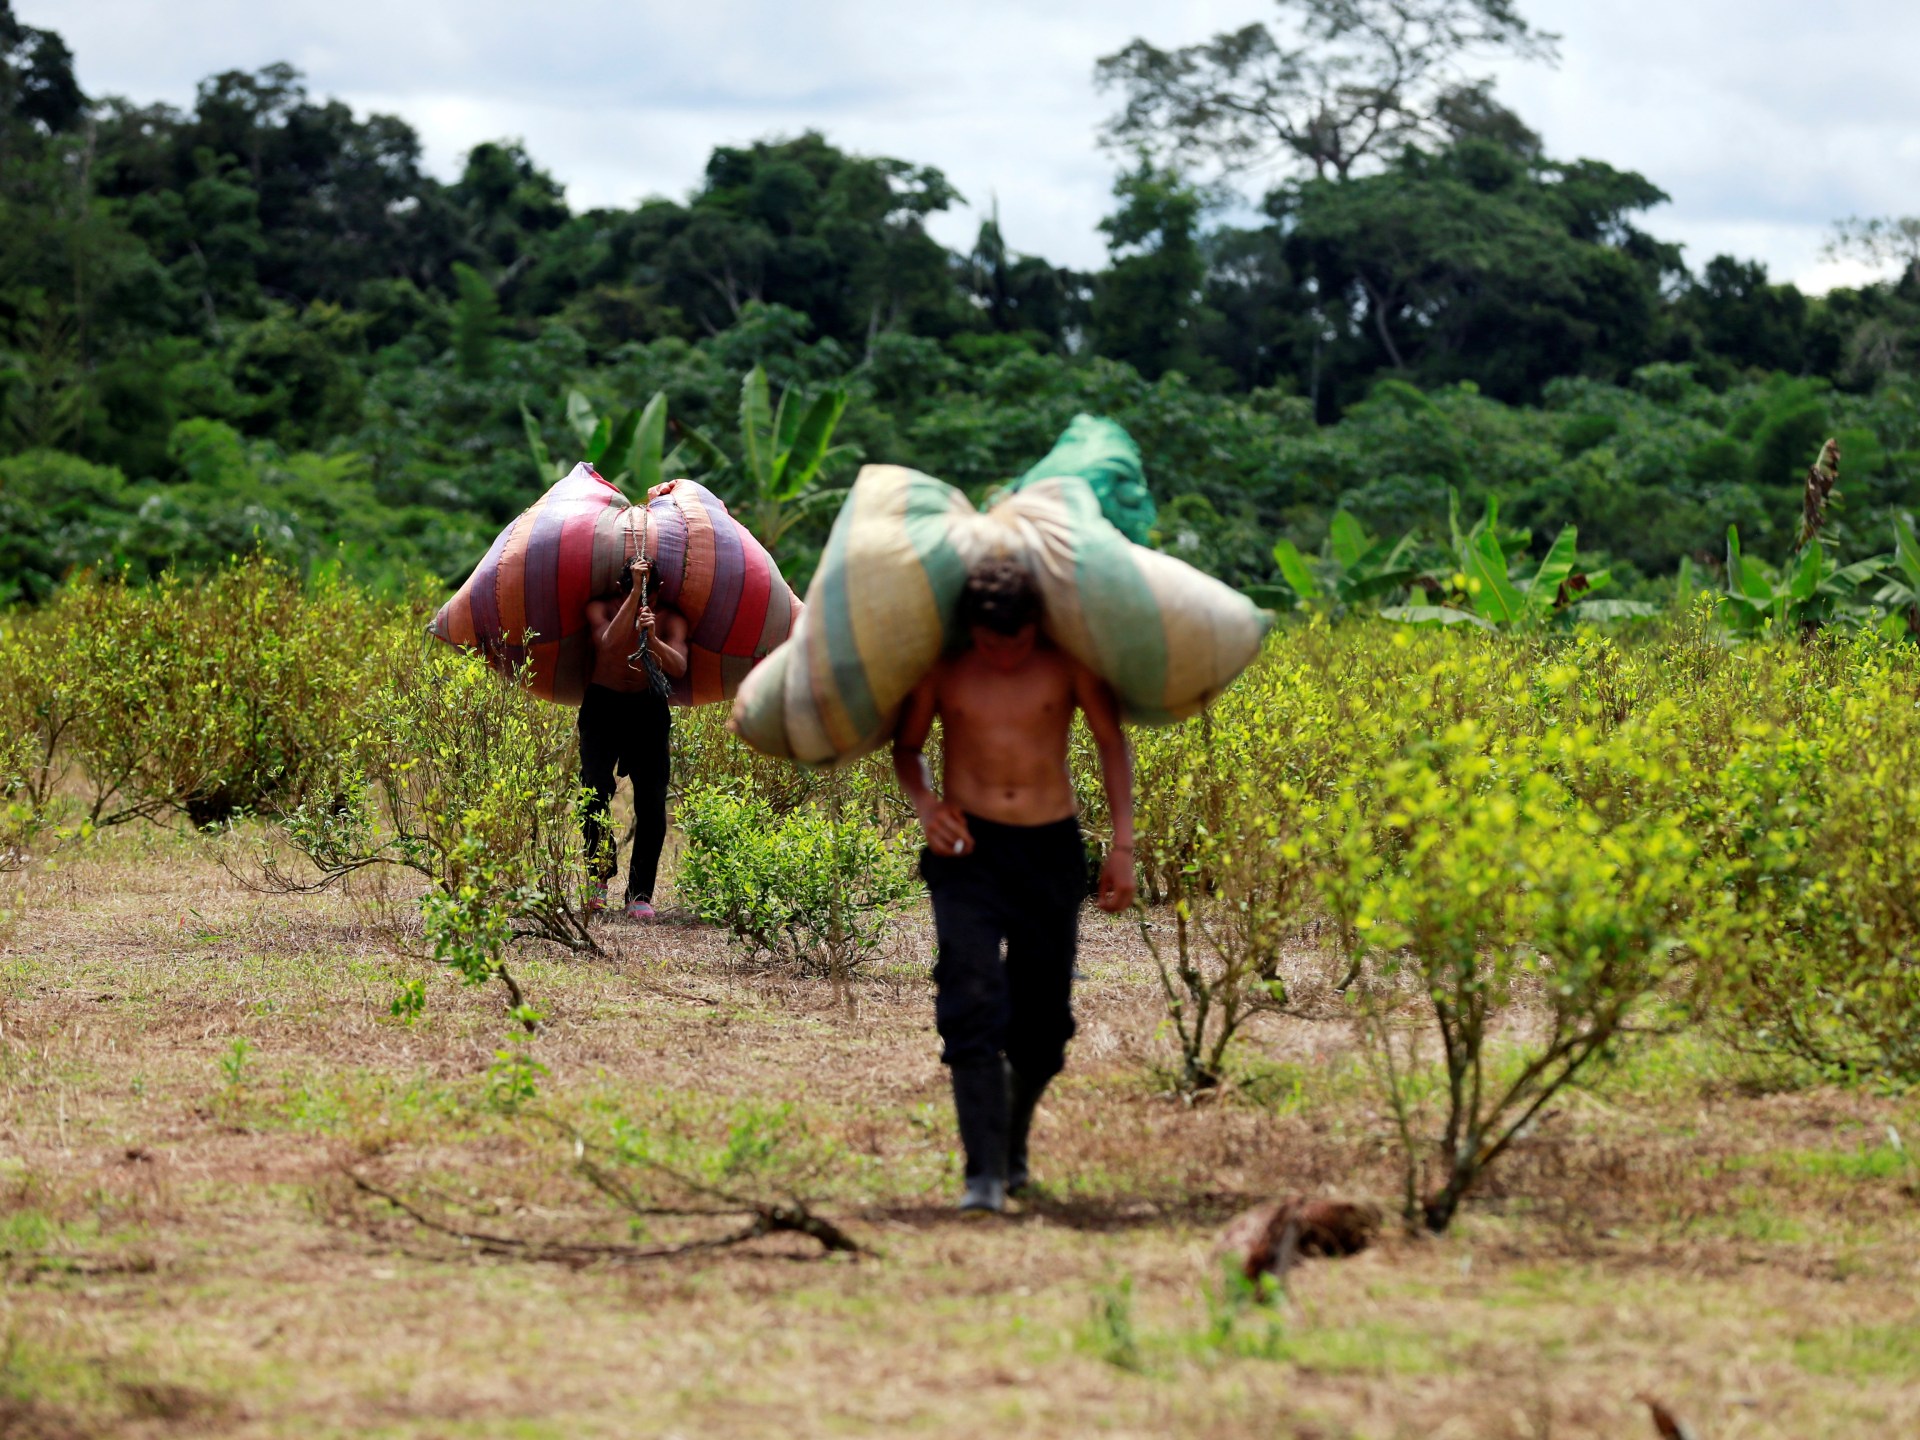 Plunging coca prices create ‘humanitarian emergency’ in Colombia